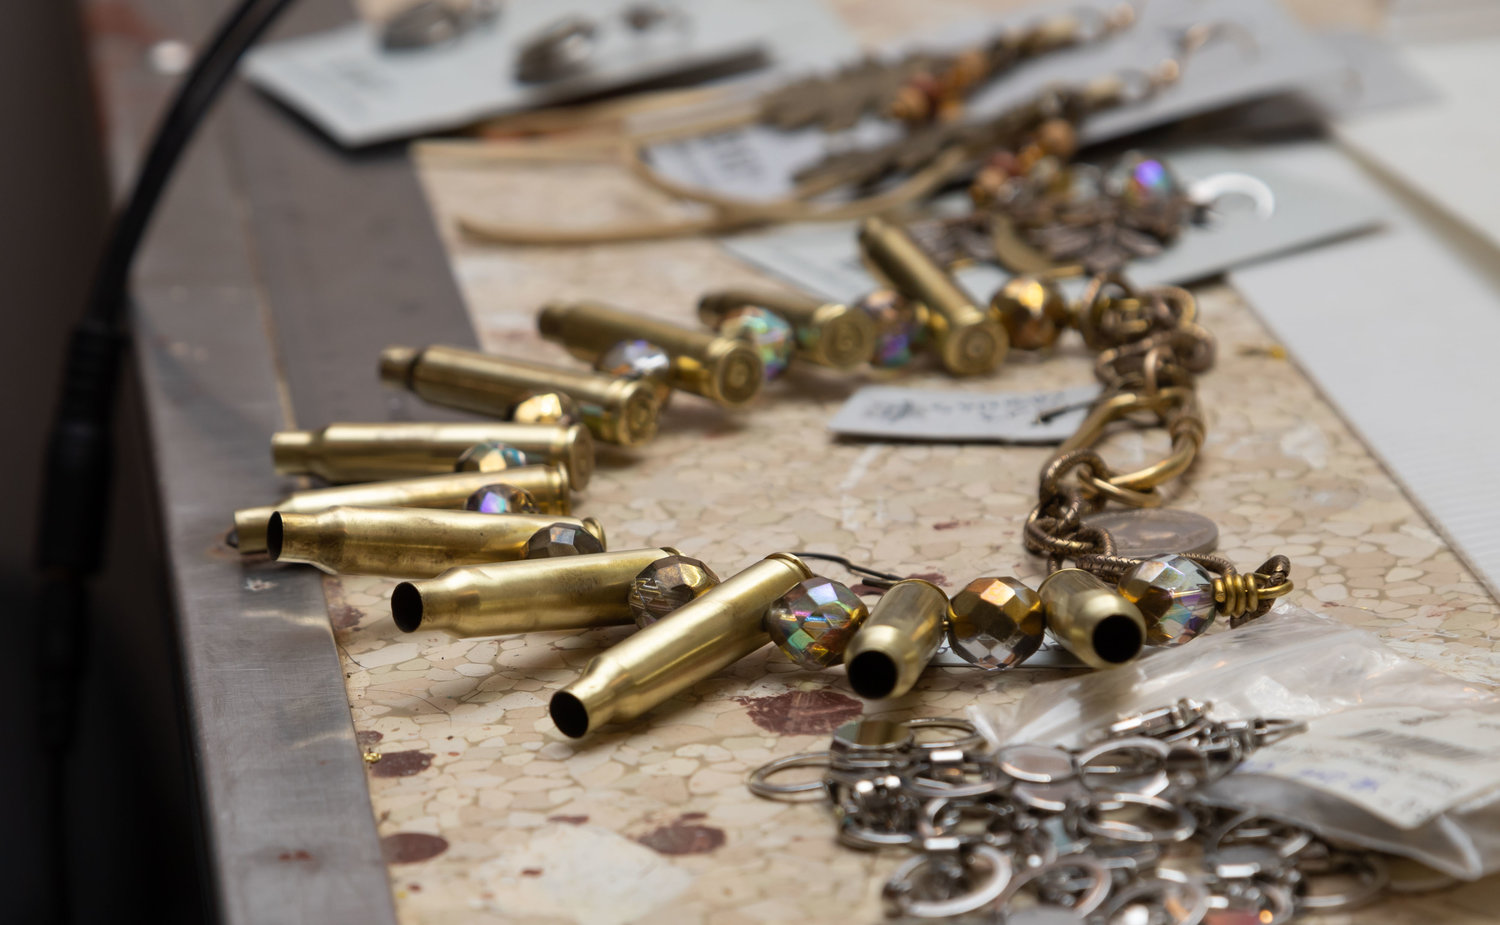 Bullet casings become jewelry in Anne Jansen's capable hands. She sells the jewelry line at surshotjewelry.com.